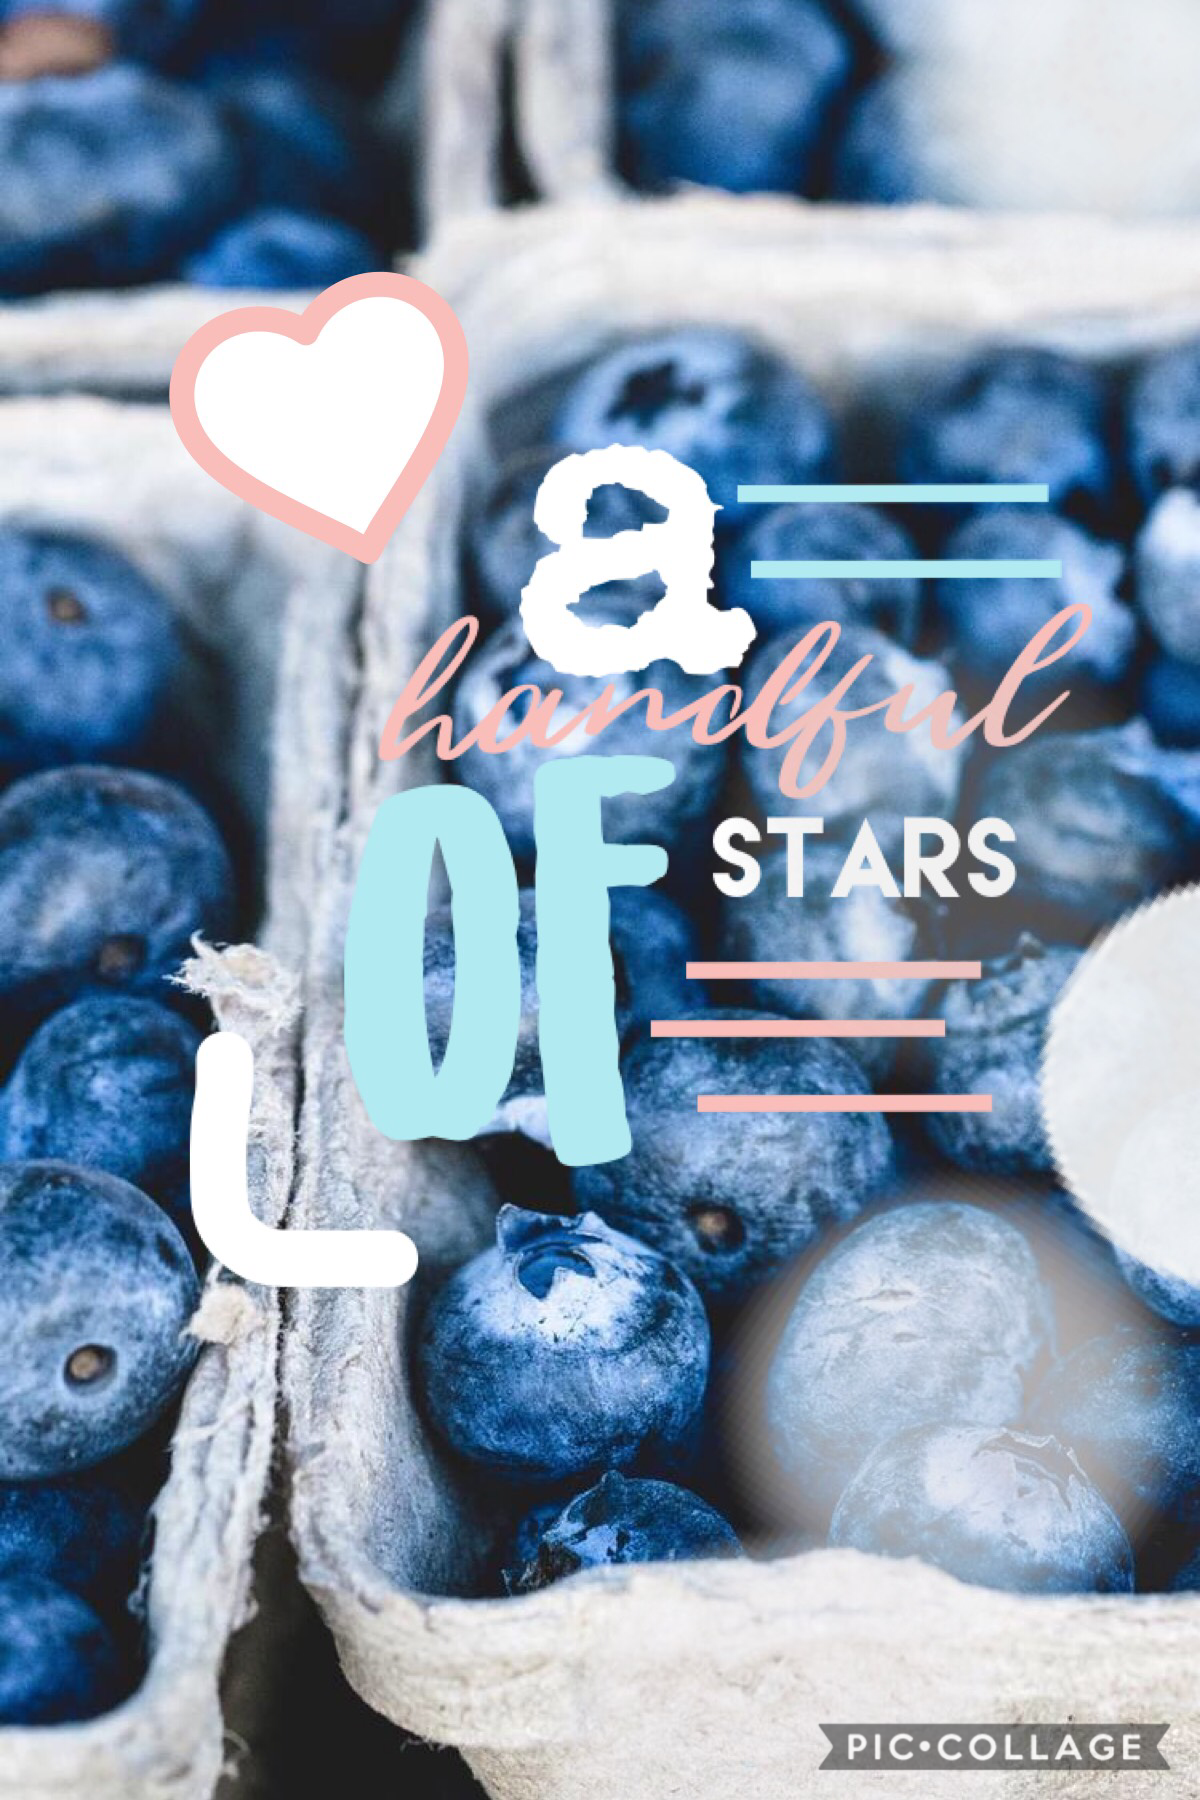 inspired by an amazing book i absolutely love! next time you eat a blueberry, look at it very closely and think back to this💗💙🍓(no blueberry emoji so a strawberry will have to do :( )